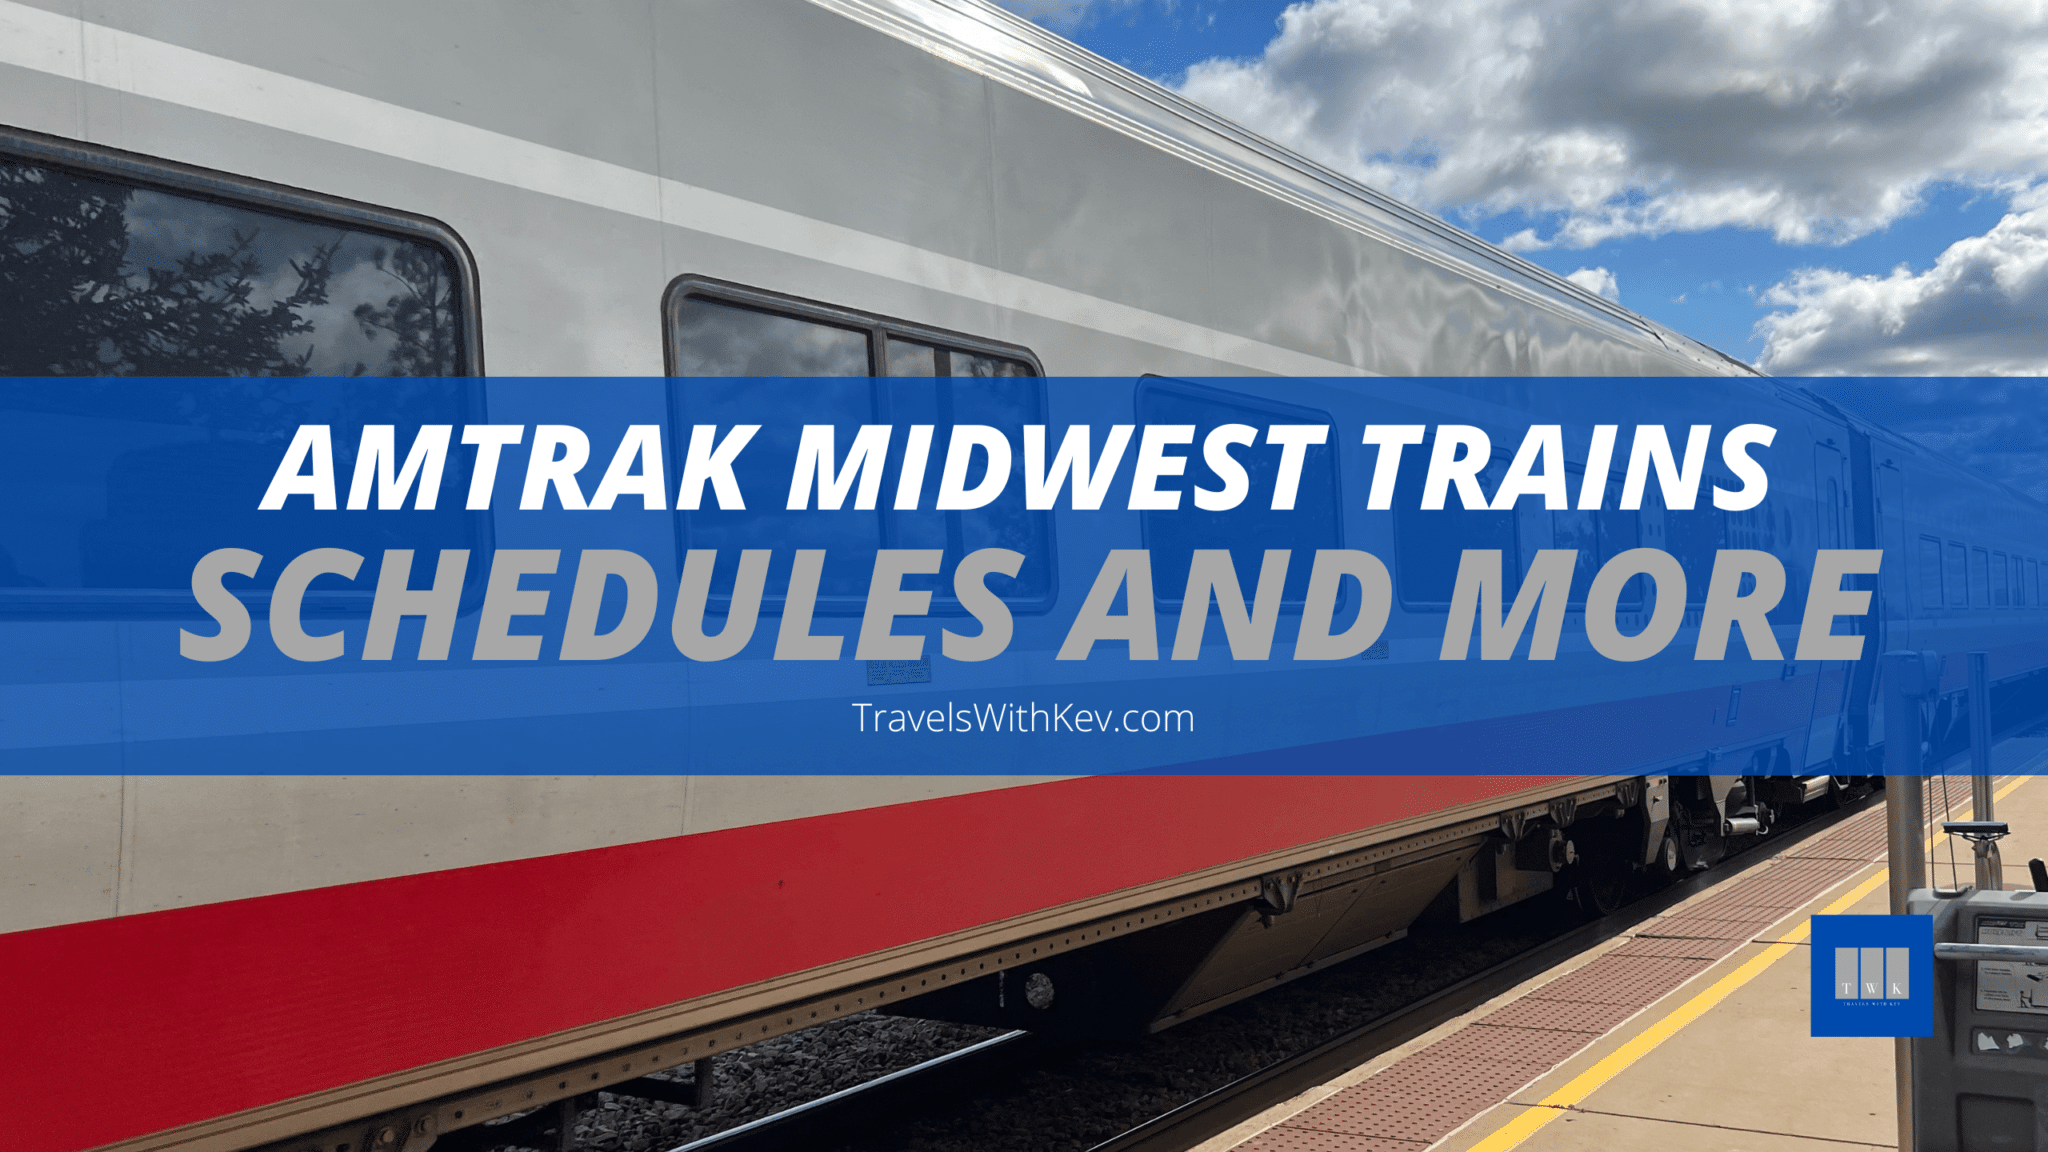 Schedules For Amtrak Midwest Trains